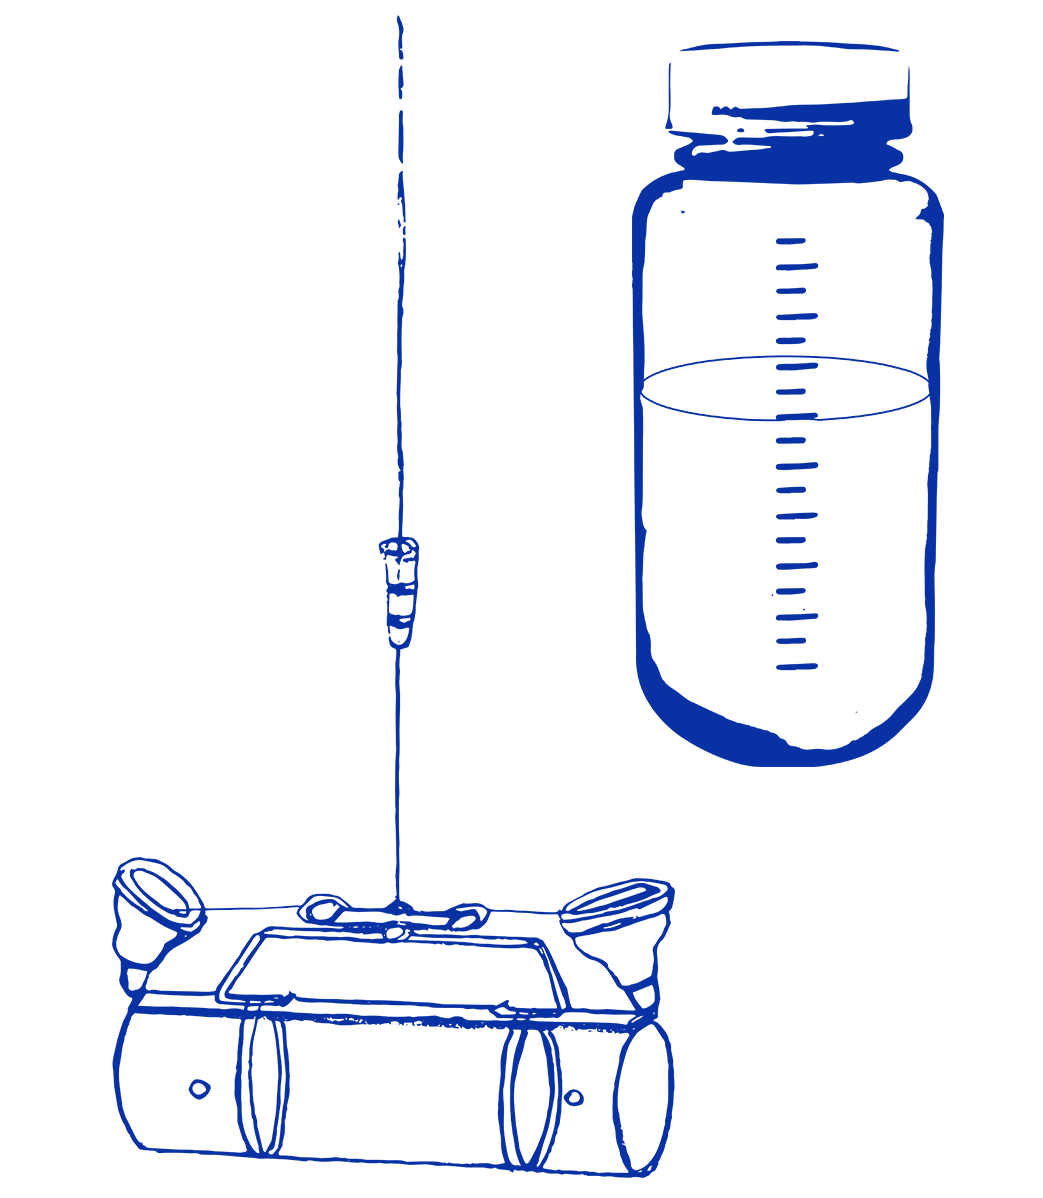 Blue sketches of a depth sampling device and a grab sample bottle.